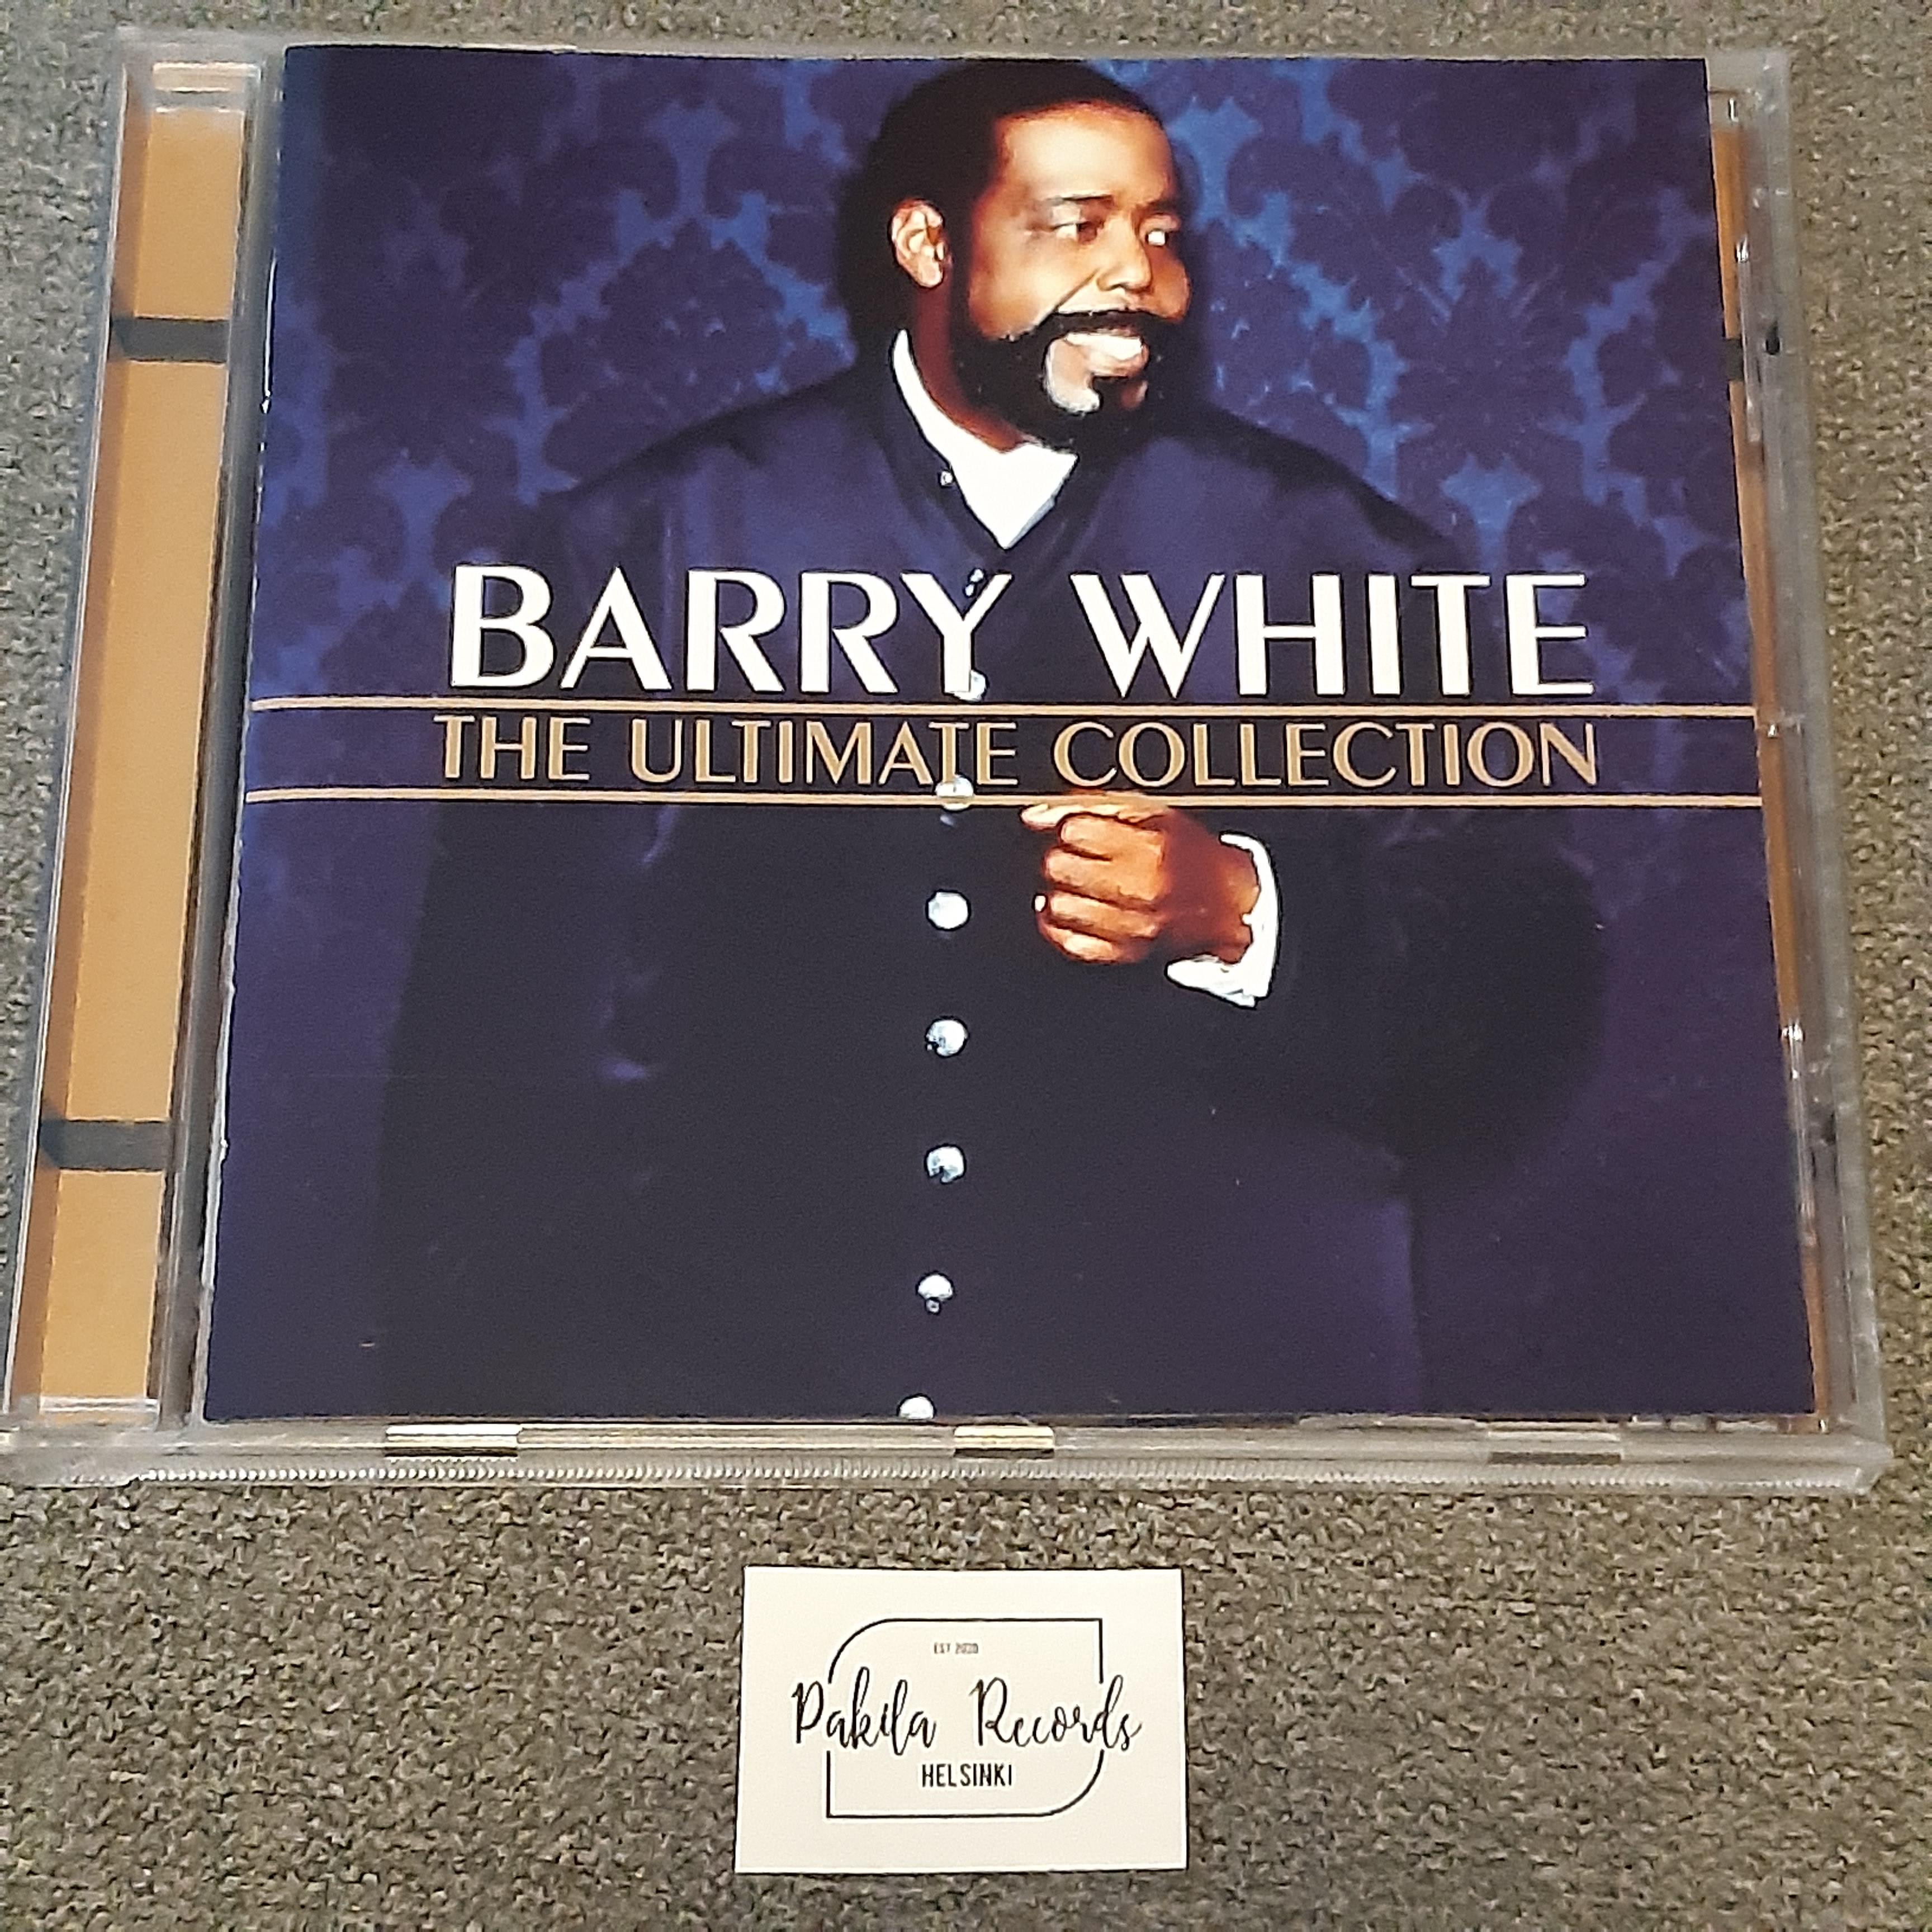 Barry White - The Ultimate Collection - CD (käytetty)